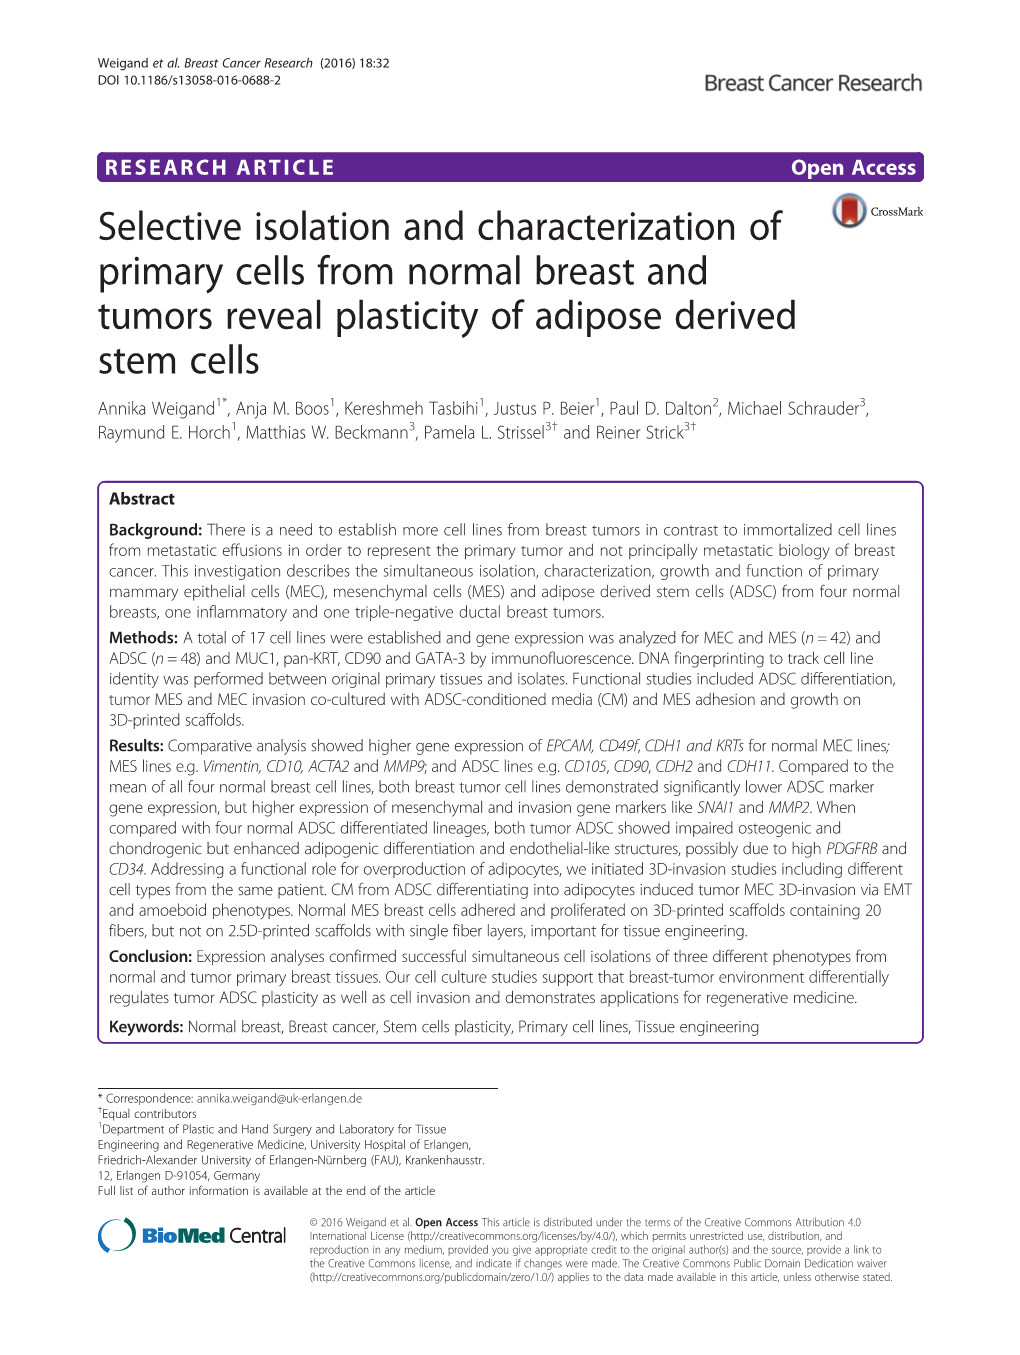 Selective Isolation and Characterization of Primary Cells from Normal Breast and Tumors Reveal Plasticity of Adipose Derived Stem Cells Annika Weigand1*, Anja M